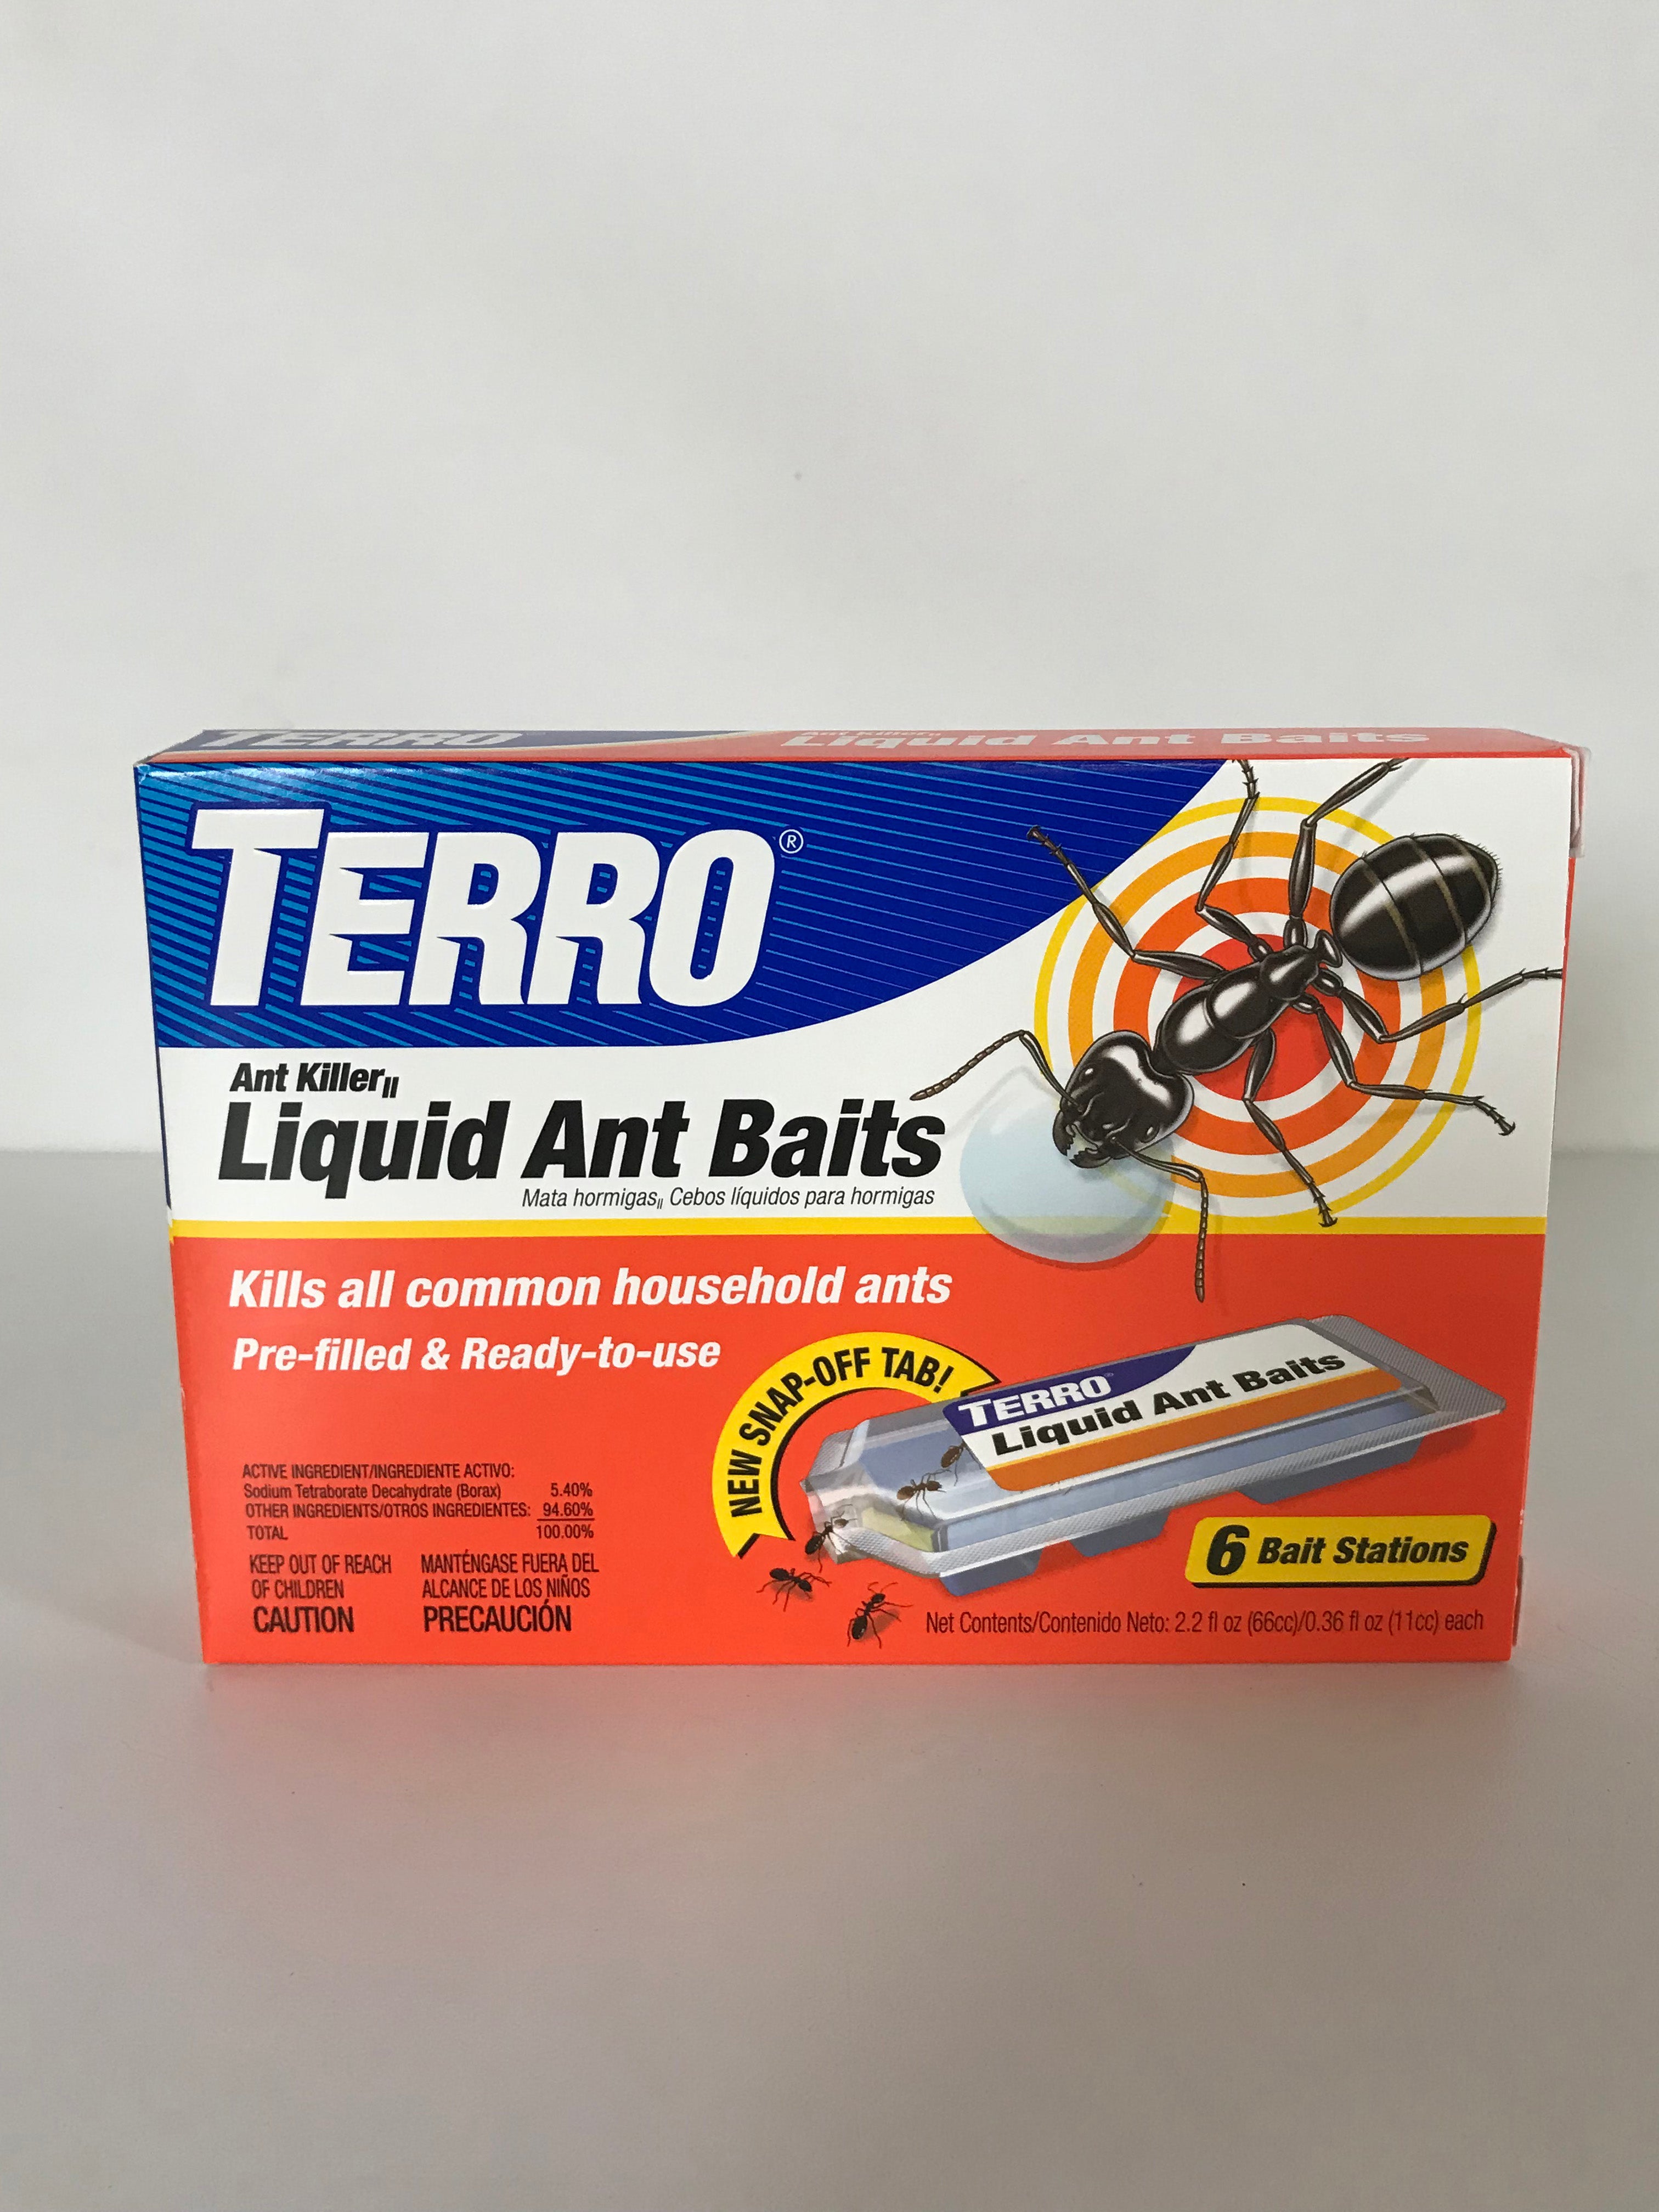 How to Get Rid of Ants -- Terro Liquid Ant Bait Overview 